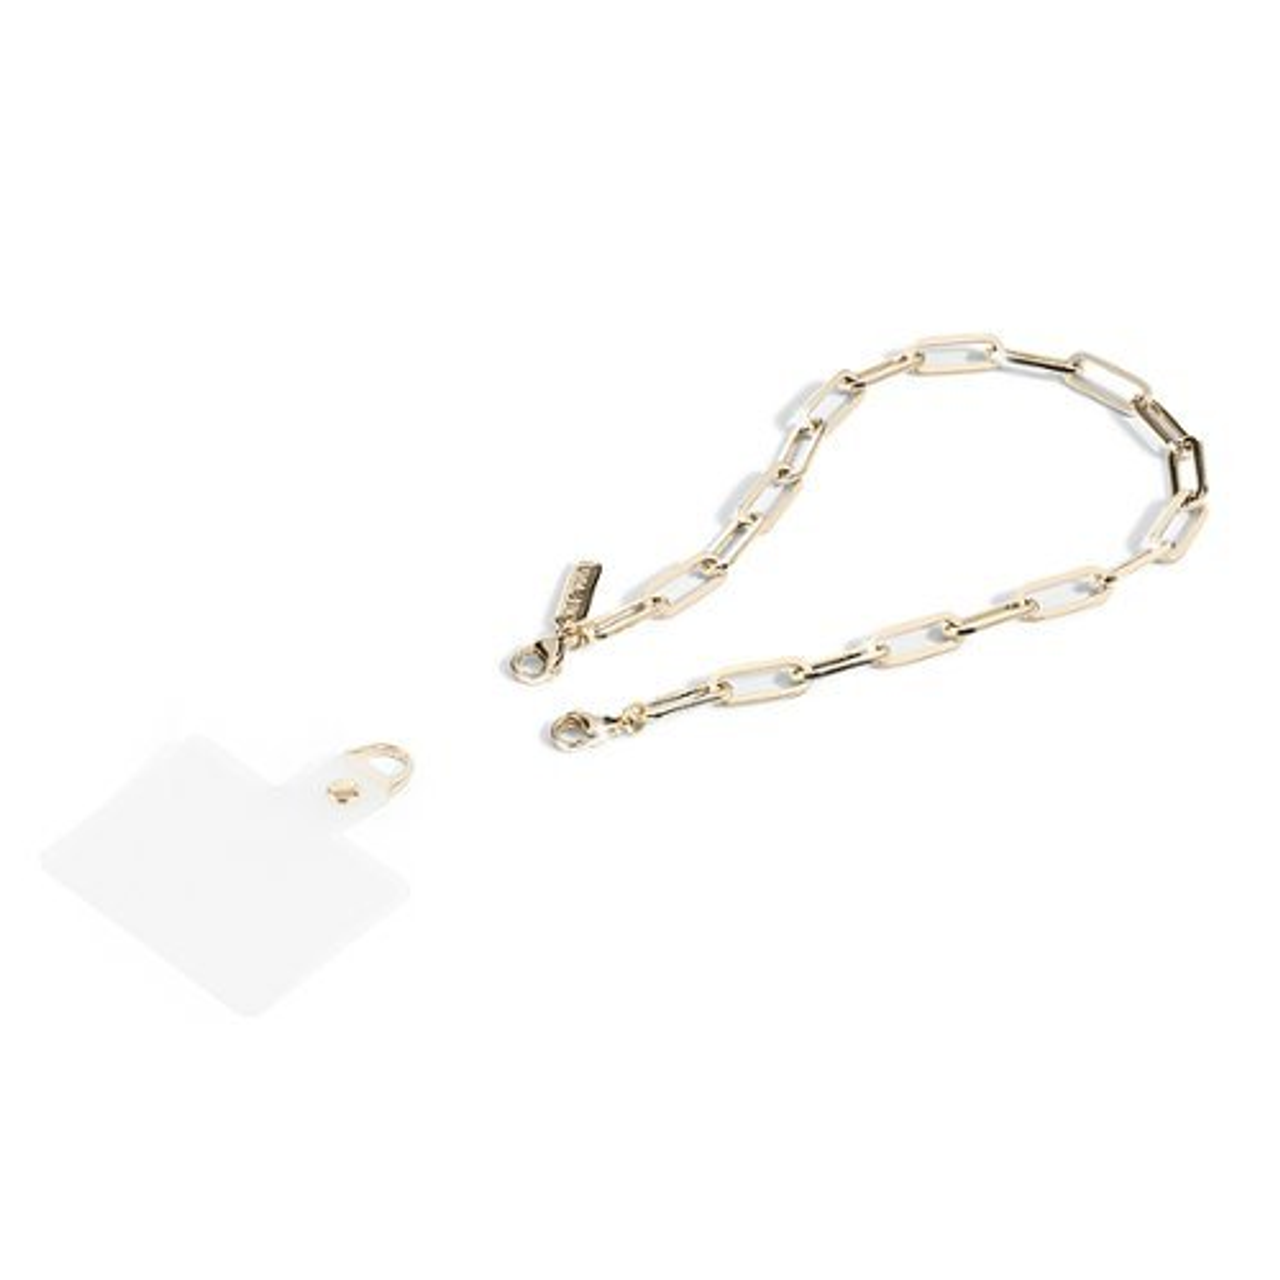 Case-Mate - Wristlet Link Chain for Most Cell Phones - Champagne